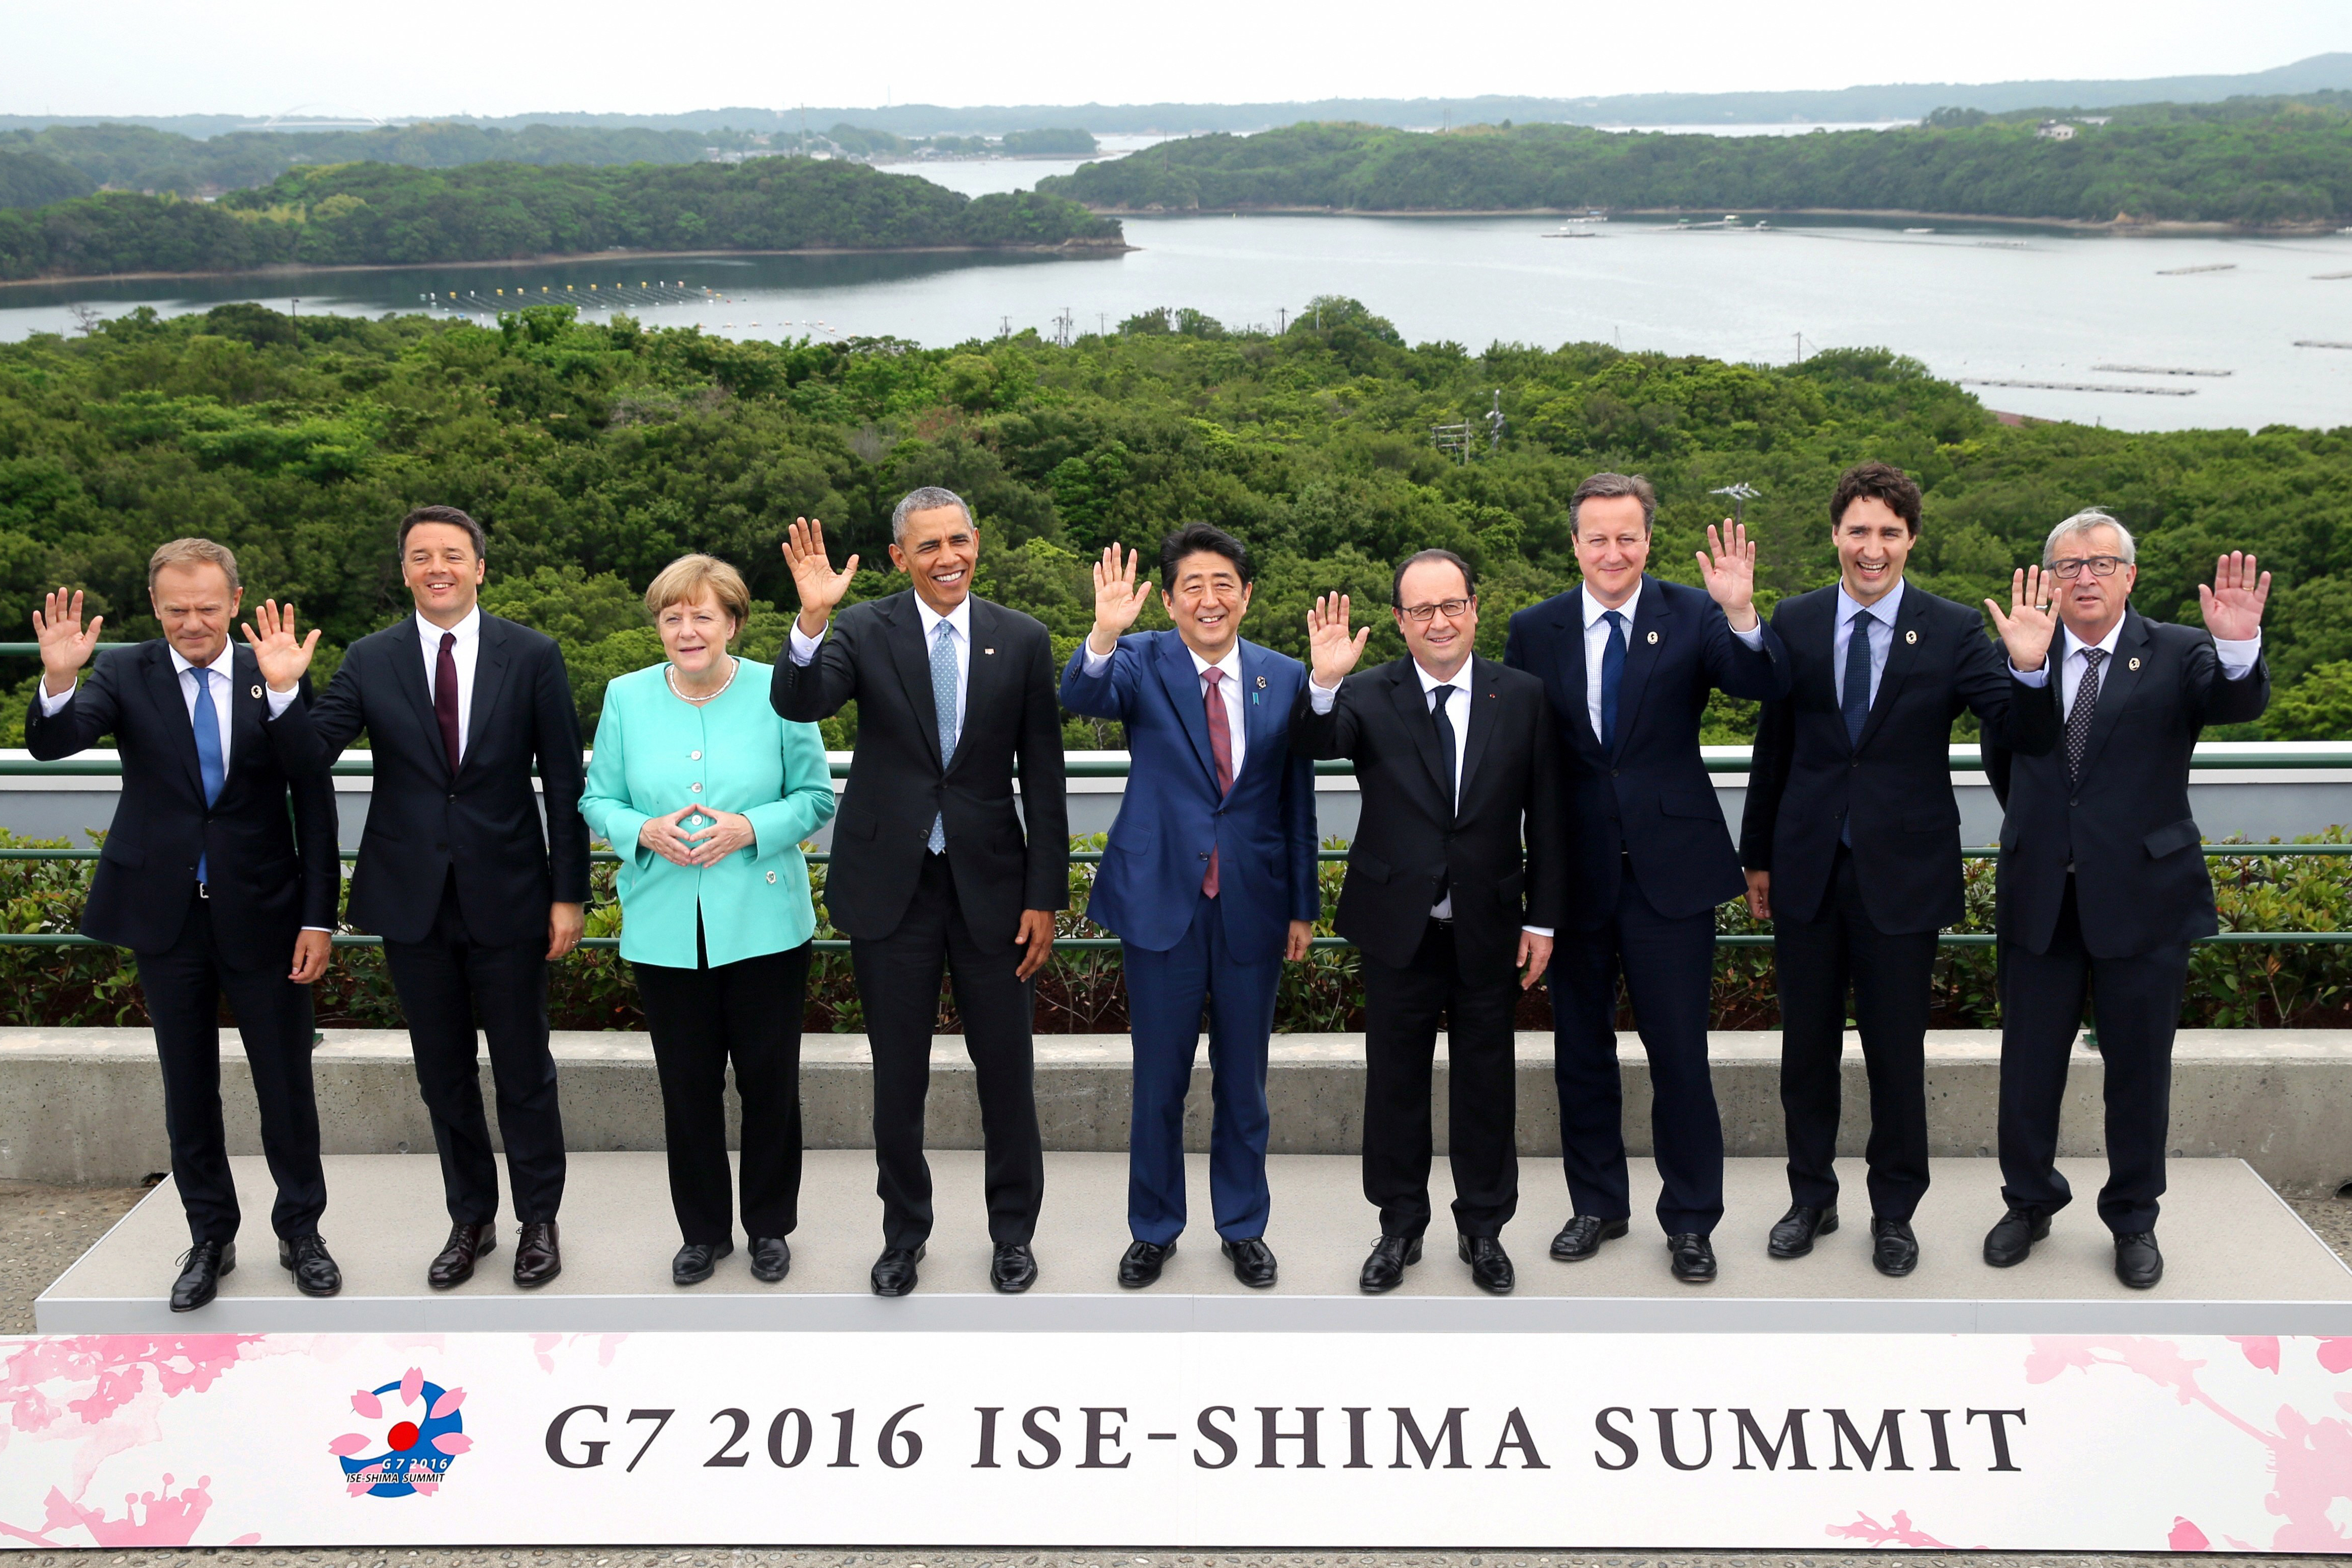 European Council President Donald Tusk, Italian Prime Minister Matteo Renzi, German Chancellor Angela Merkel, U.S. President Barack Obama, Japanese Prime Minister Shinzo Abe, French President Francois Hollande, British Prime Minister David Cameron, Canadian Prime Minister Justin Trudeau and European Commission President Jean-Claude Juncker pose for photographs at the family photo session during the Group of Seven summit on May 26, 2016 in Shima, Mie, Japan.